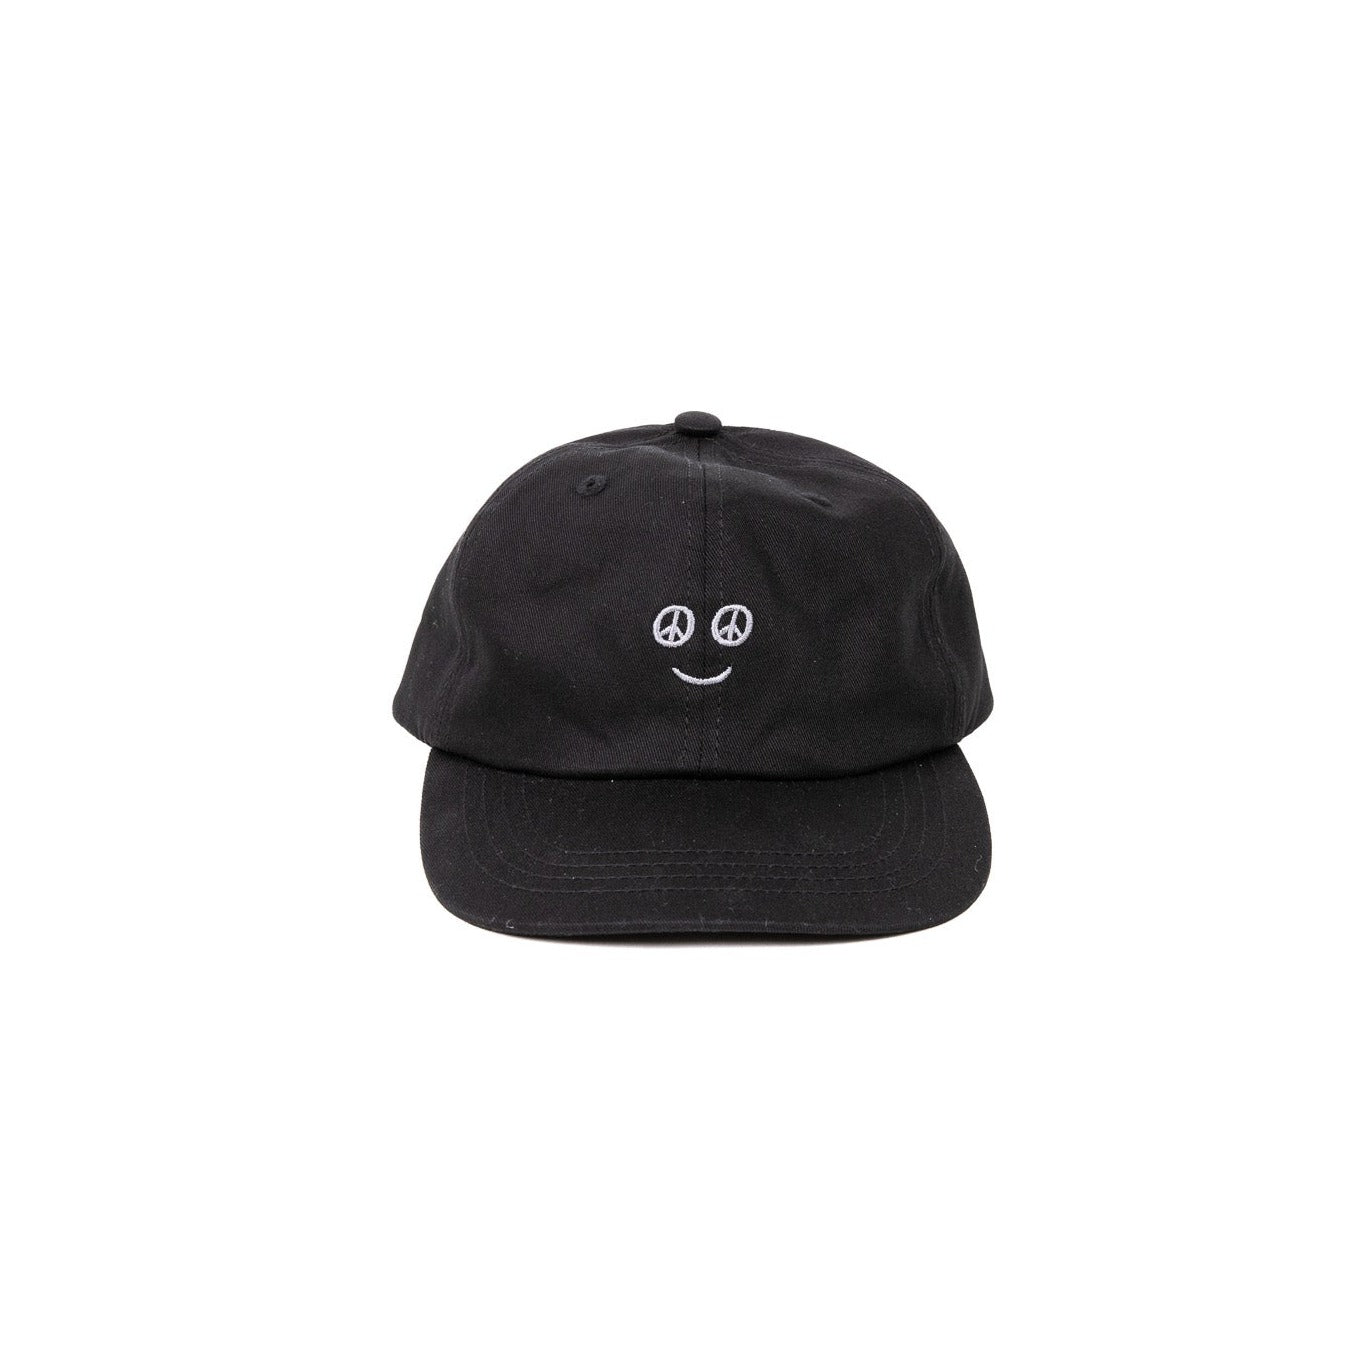 PeaceFace Twill Hat - Black